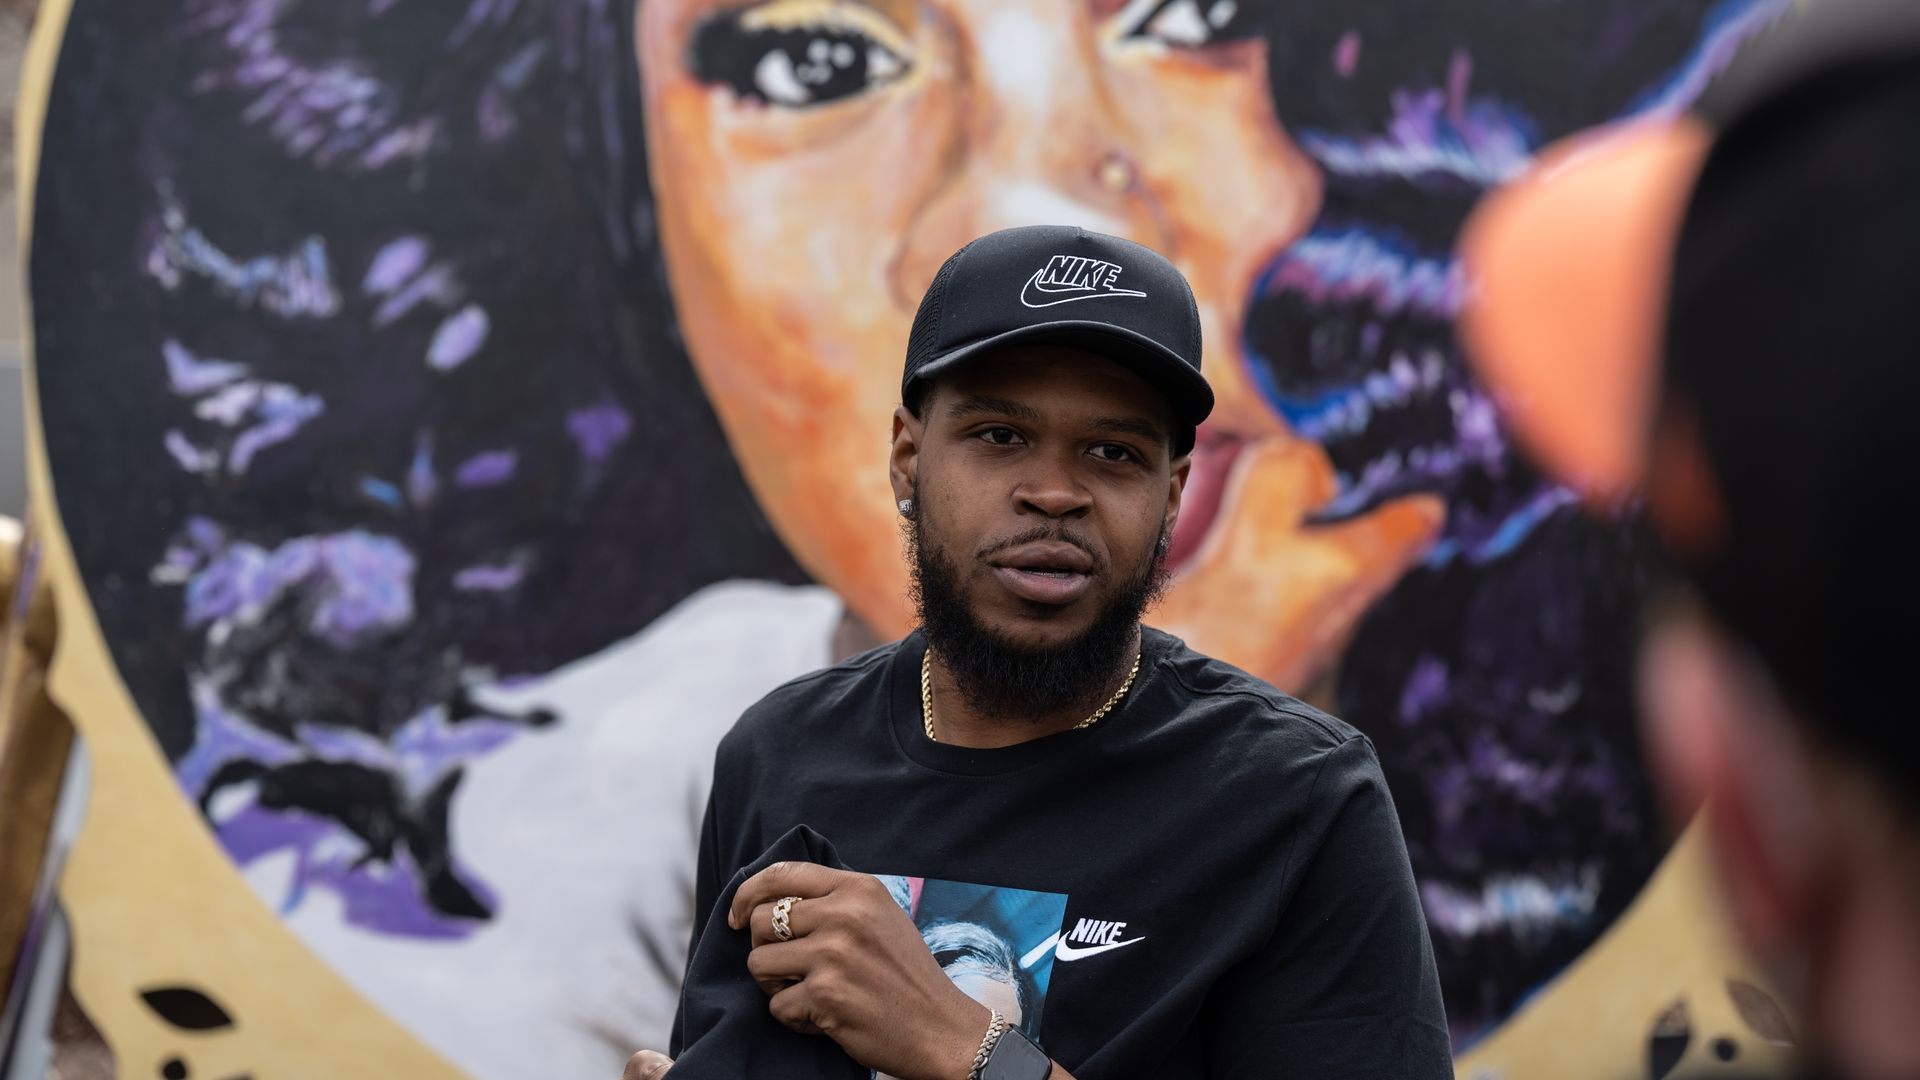 Kenneth Walker, boyfriend of Breonna Taylor, stands in front of a portrait of Taylor during a protest memorial for her in Jefferson Square Park on March 13, 2021 in Louisville, Kentucky.